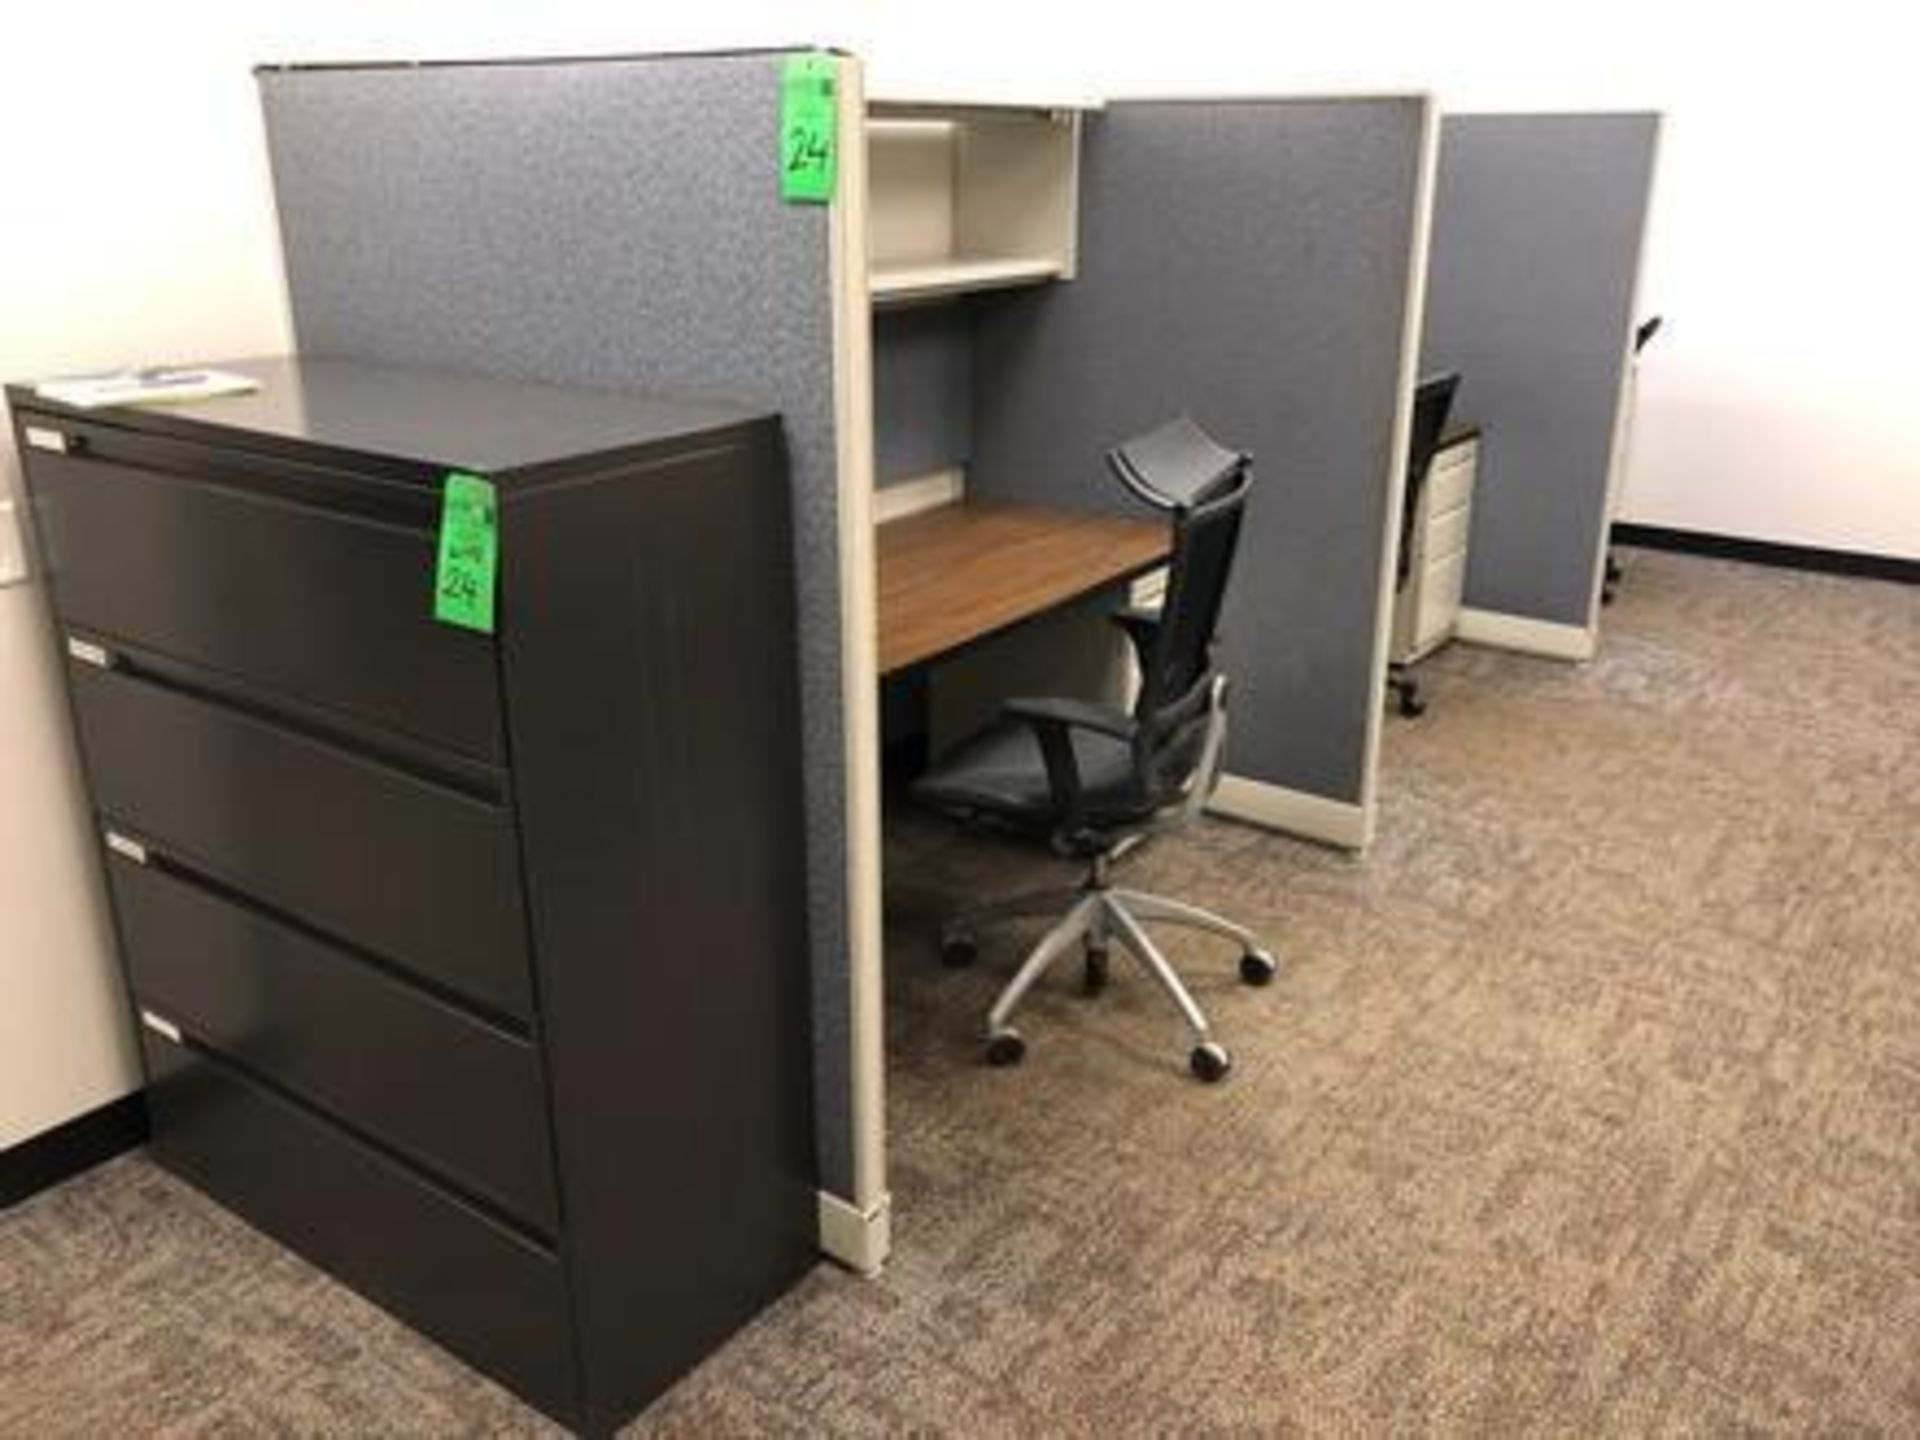 Work Station c/o: (3) Wood Laminate Tables, Size 29" x 72, 3 Cubic Dividers Panel Size 48" x 68", (3